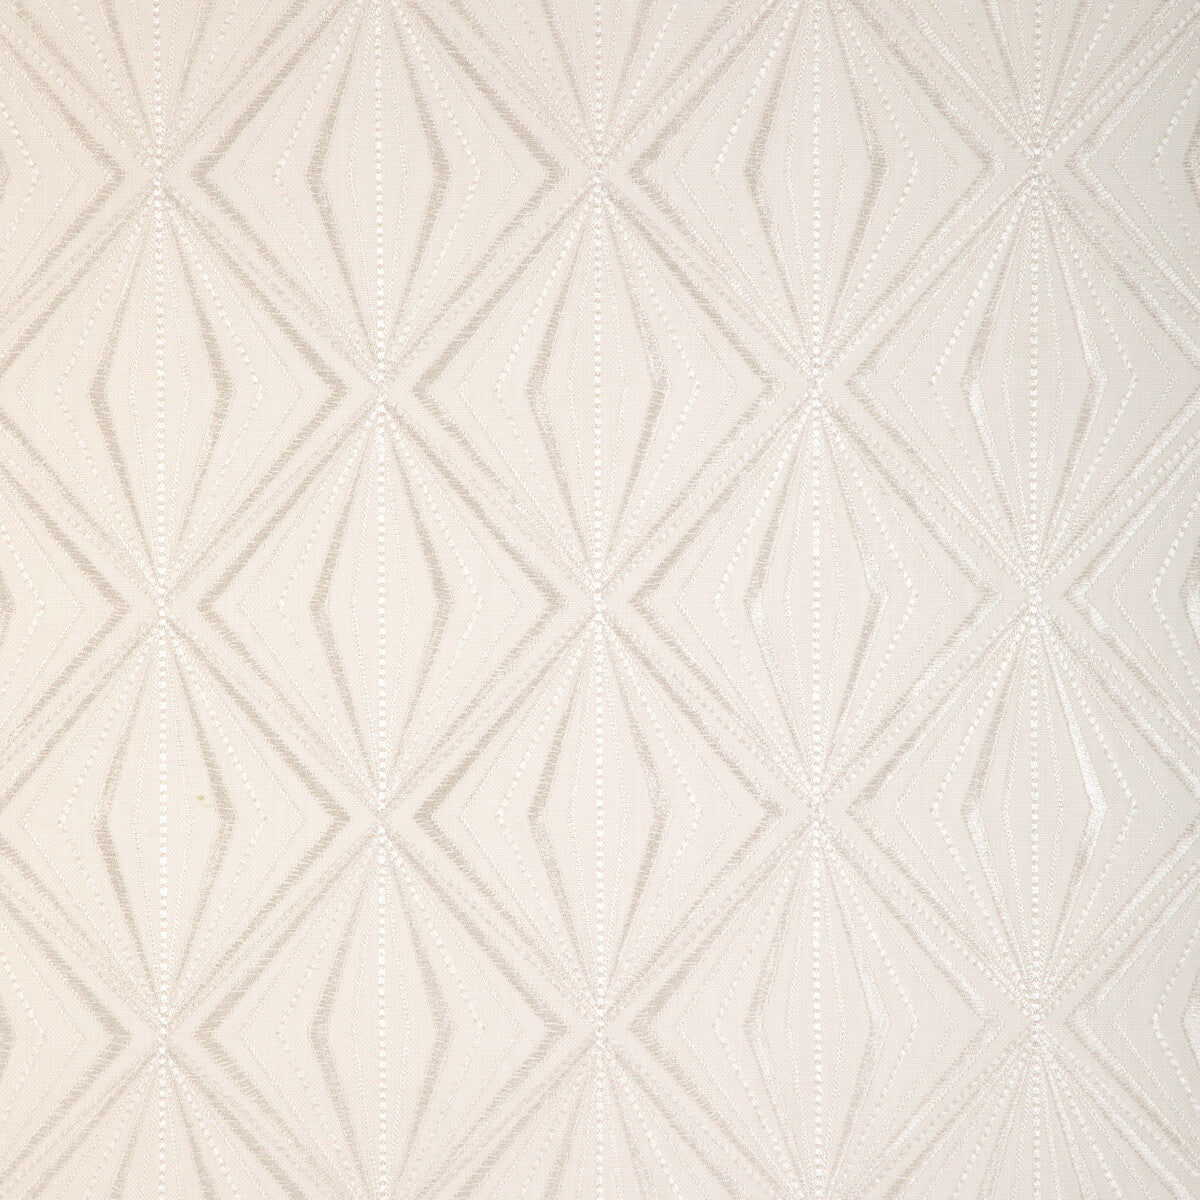 Rare Diamond fabric in cream color - pattern 36873.1116.0 - by Kravet Design in the Candice Olson collection